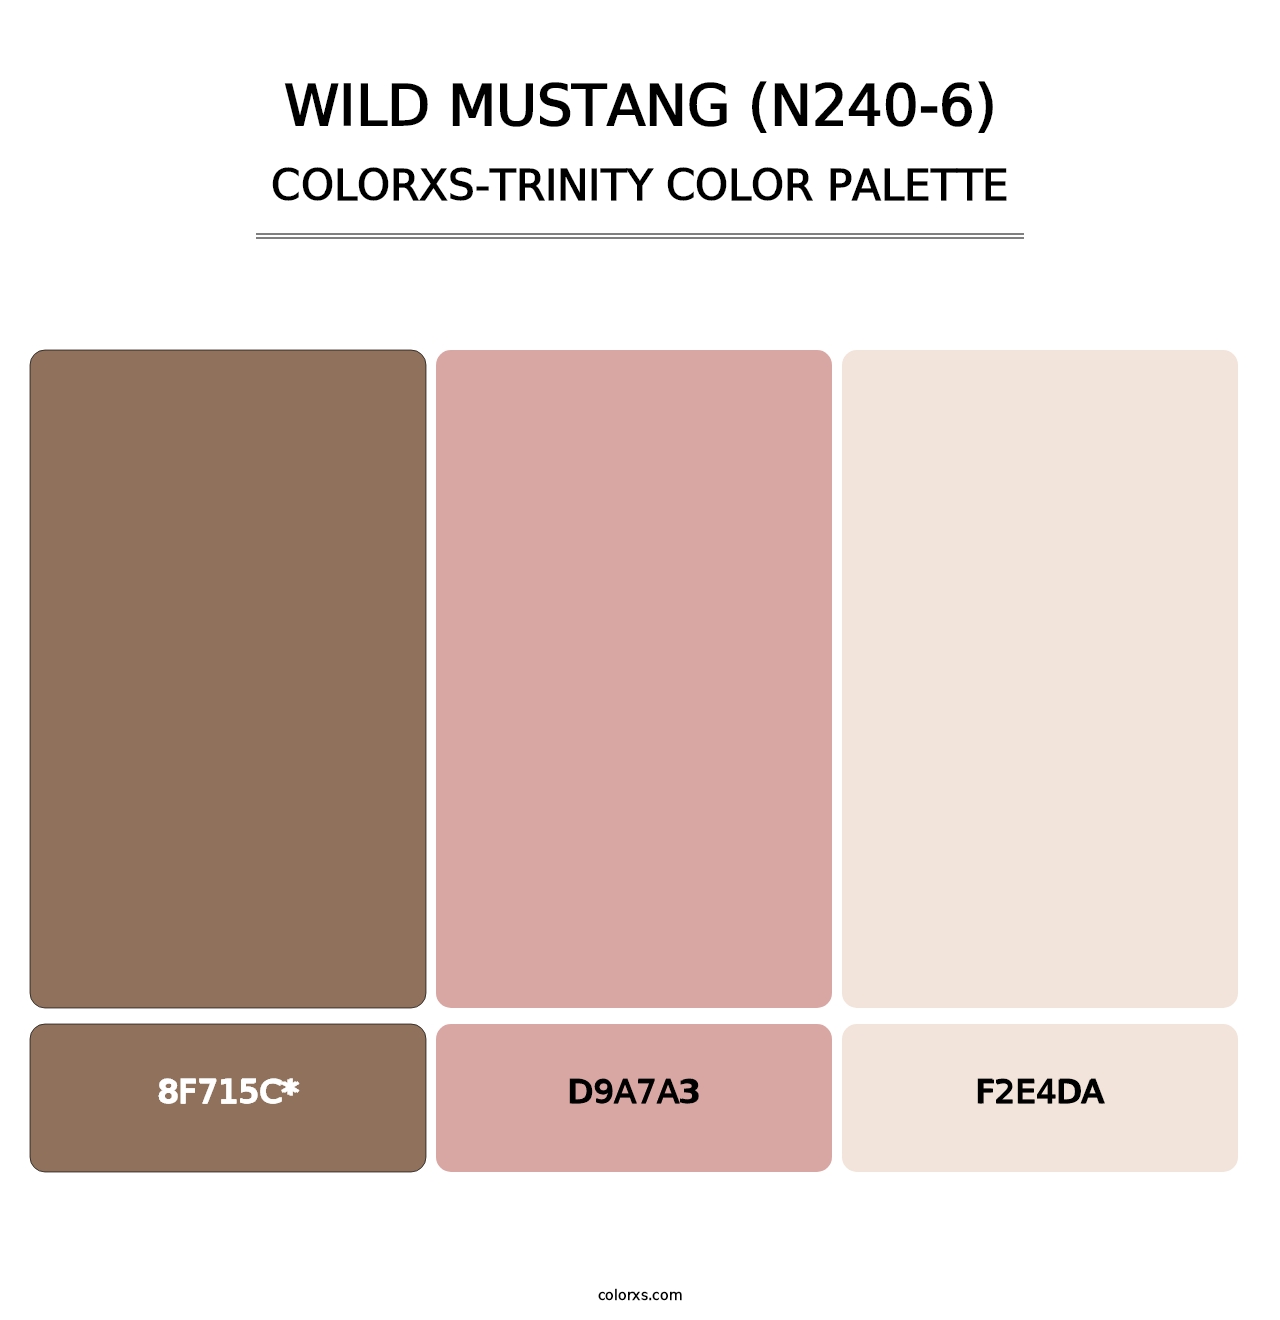 Wild Mustang (N240-6) - Colorxs Trinity Palette